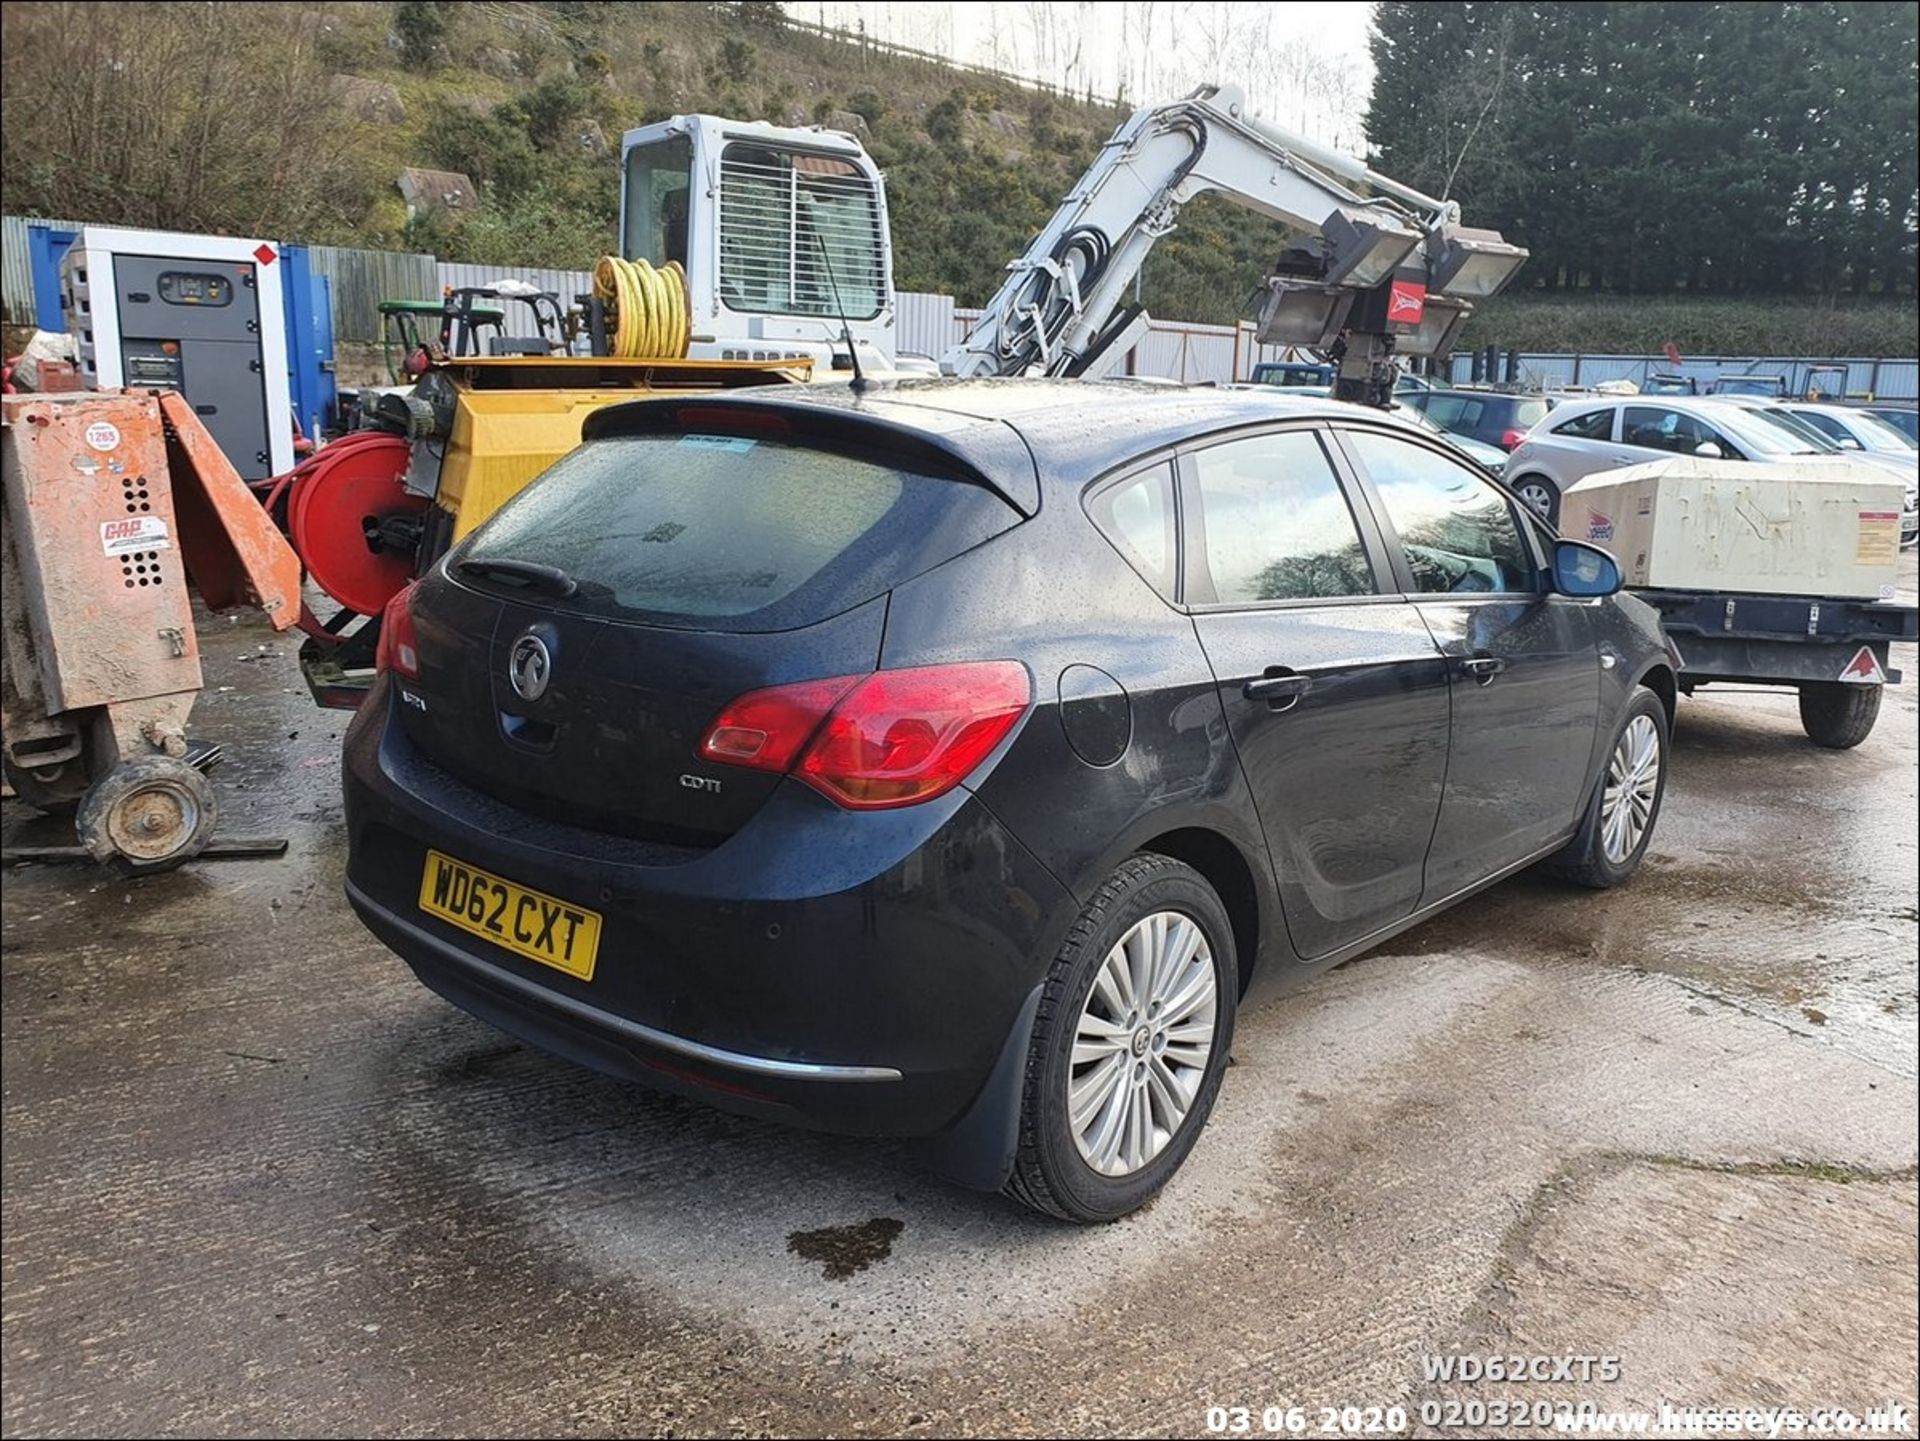 VAUXHALL ASTRA ENERGY CDTI - WD62CXT-1686cc 5 Dr Hatchback Diesel-111180 MILES - NON RUNNER - Image 4 of 4